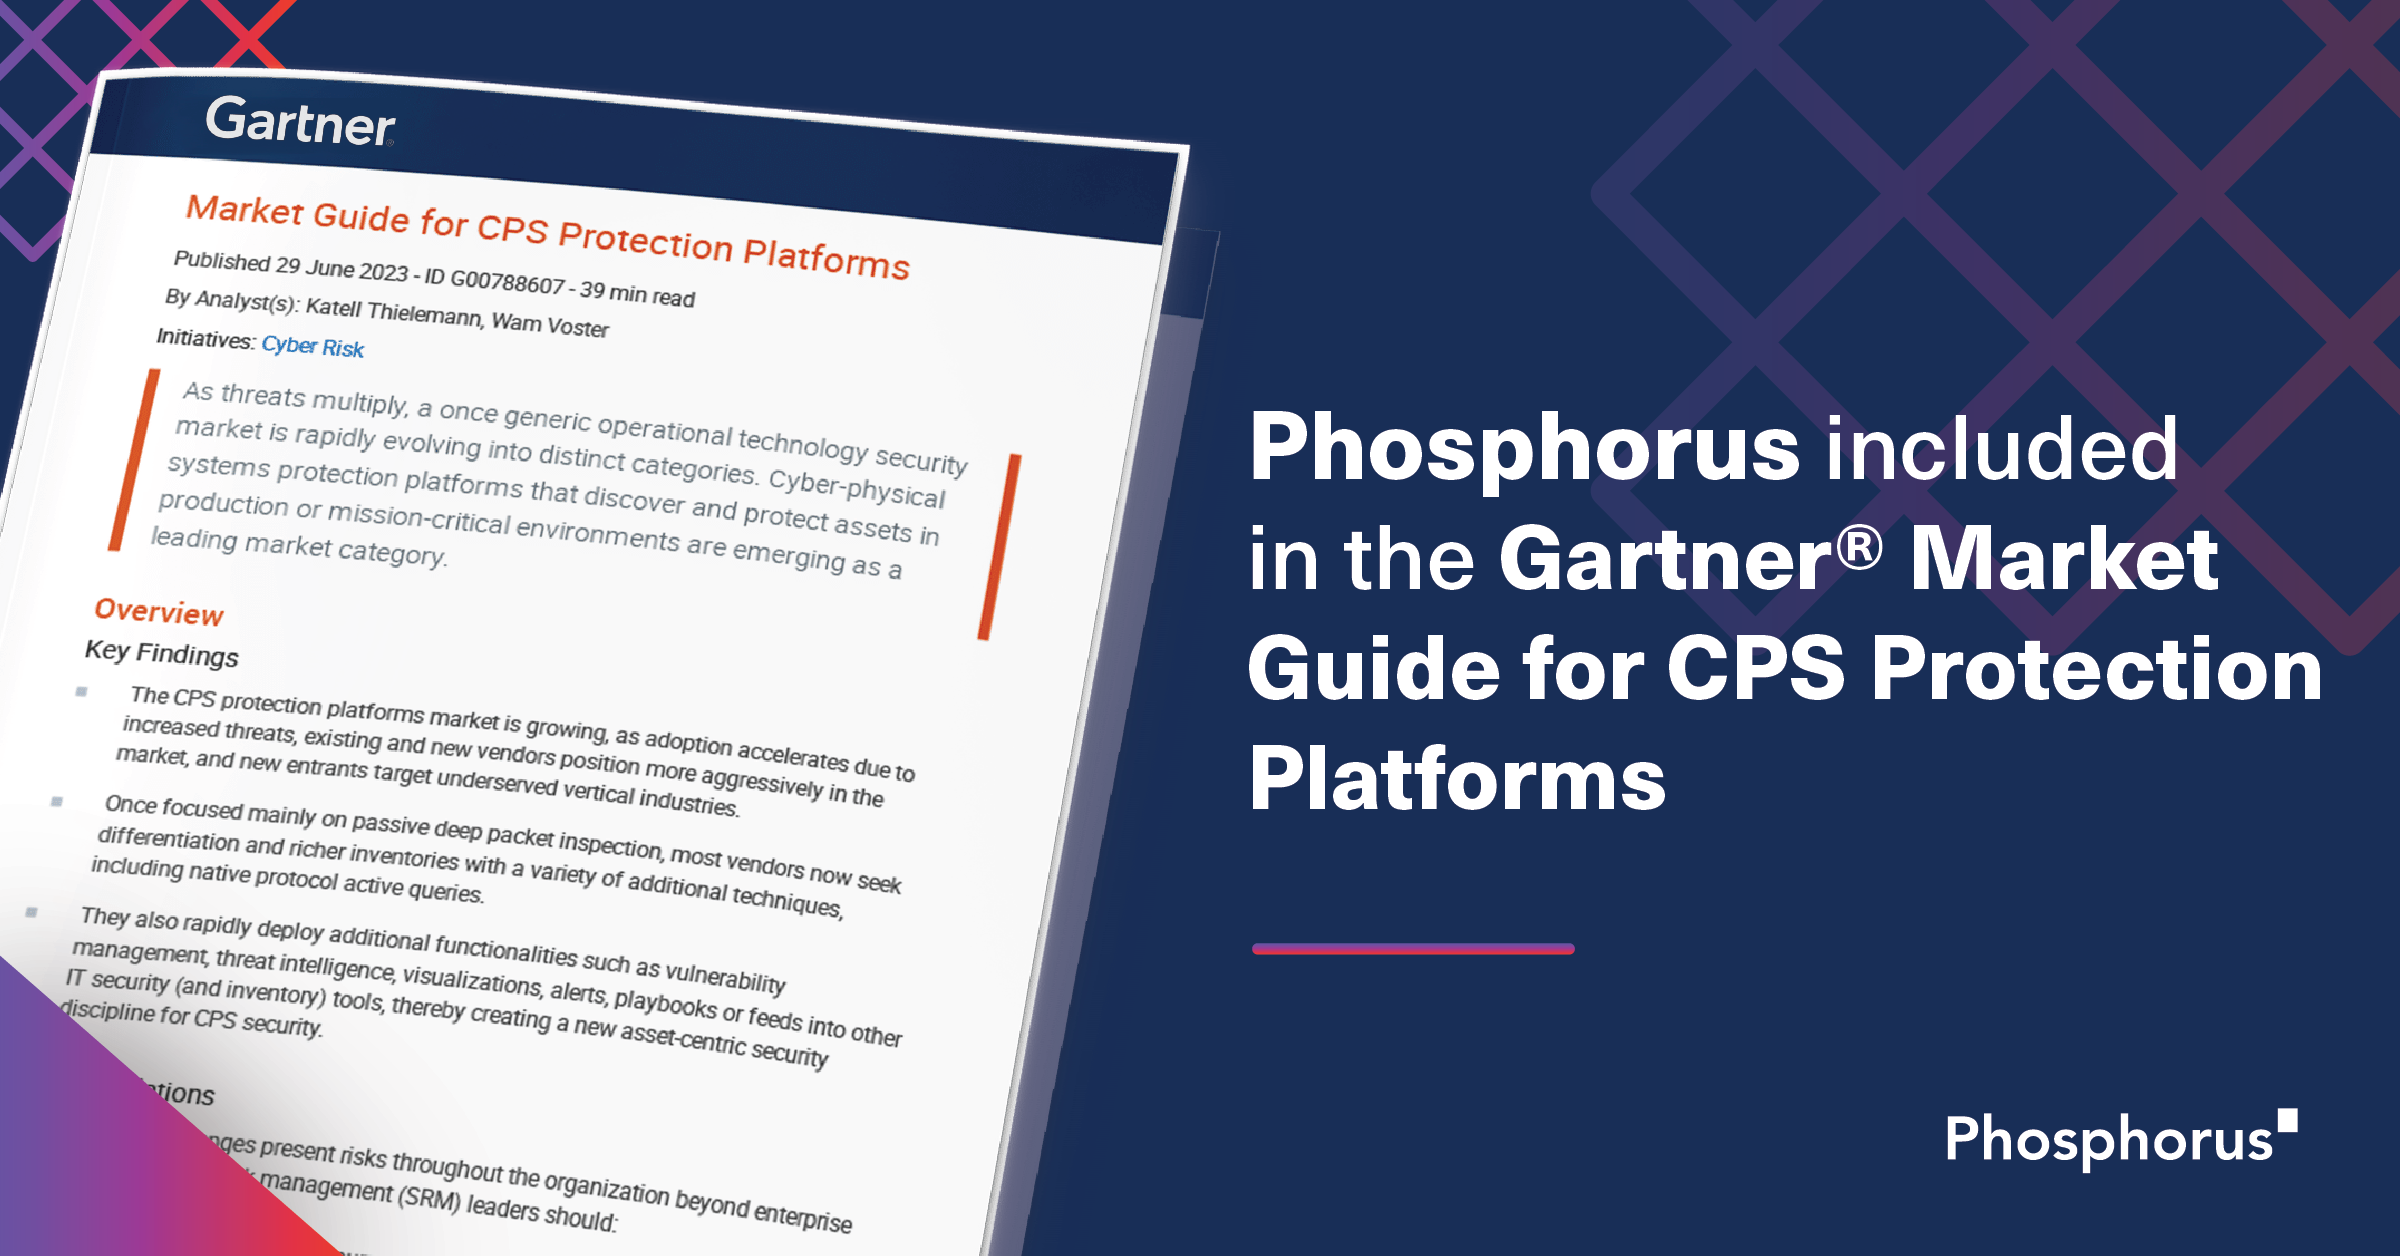 Phosphorus Included in the 2023 Gartner® Market Guide for CPS Protection Platforms for its Unified xIoT Security Management Platform